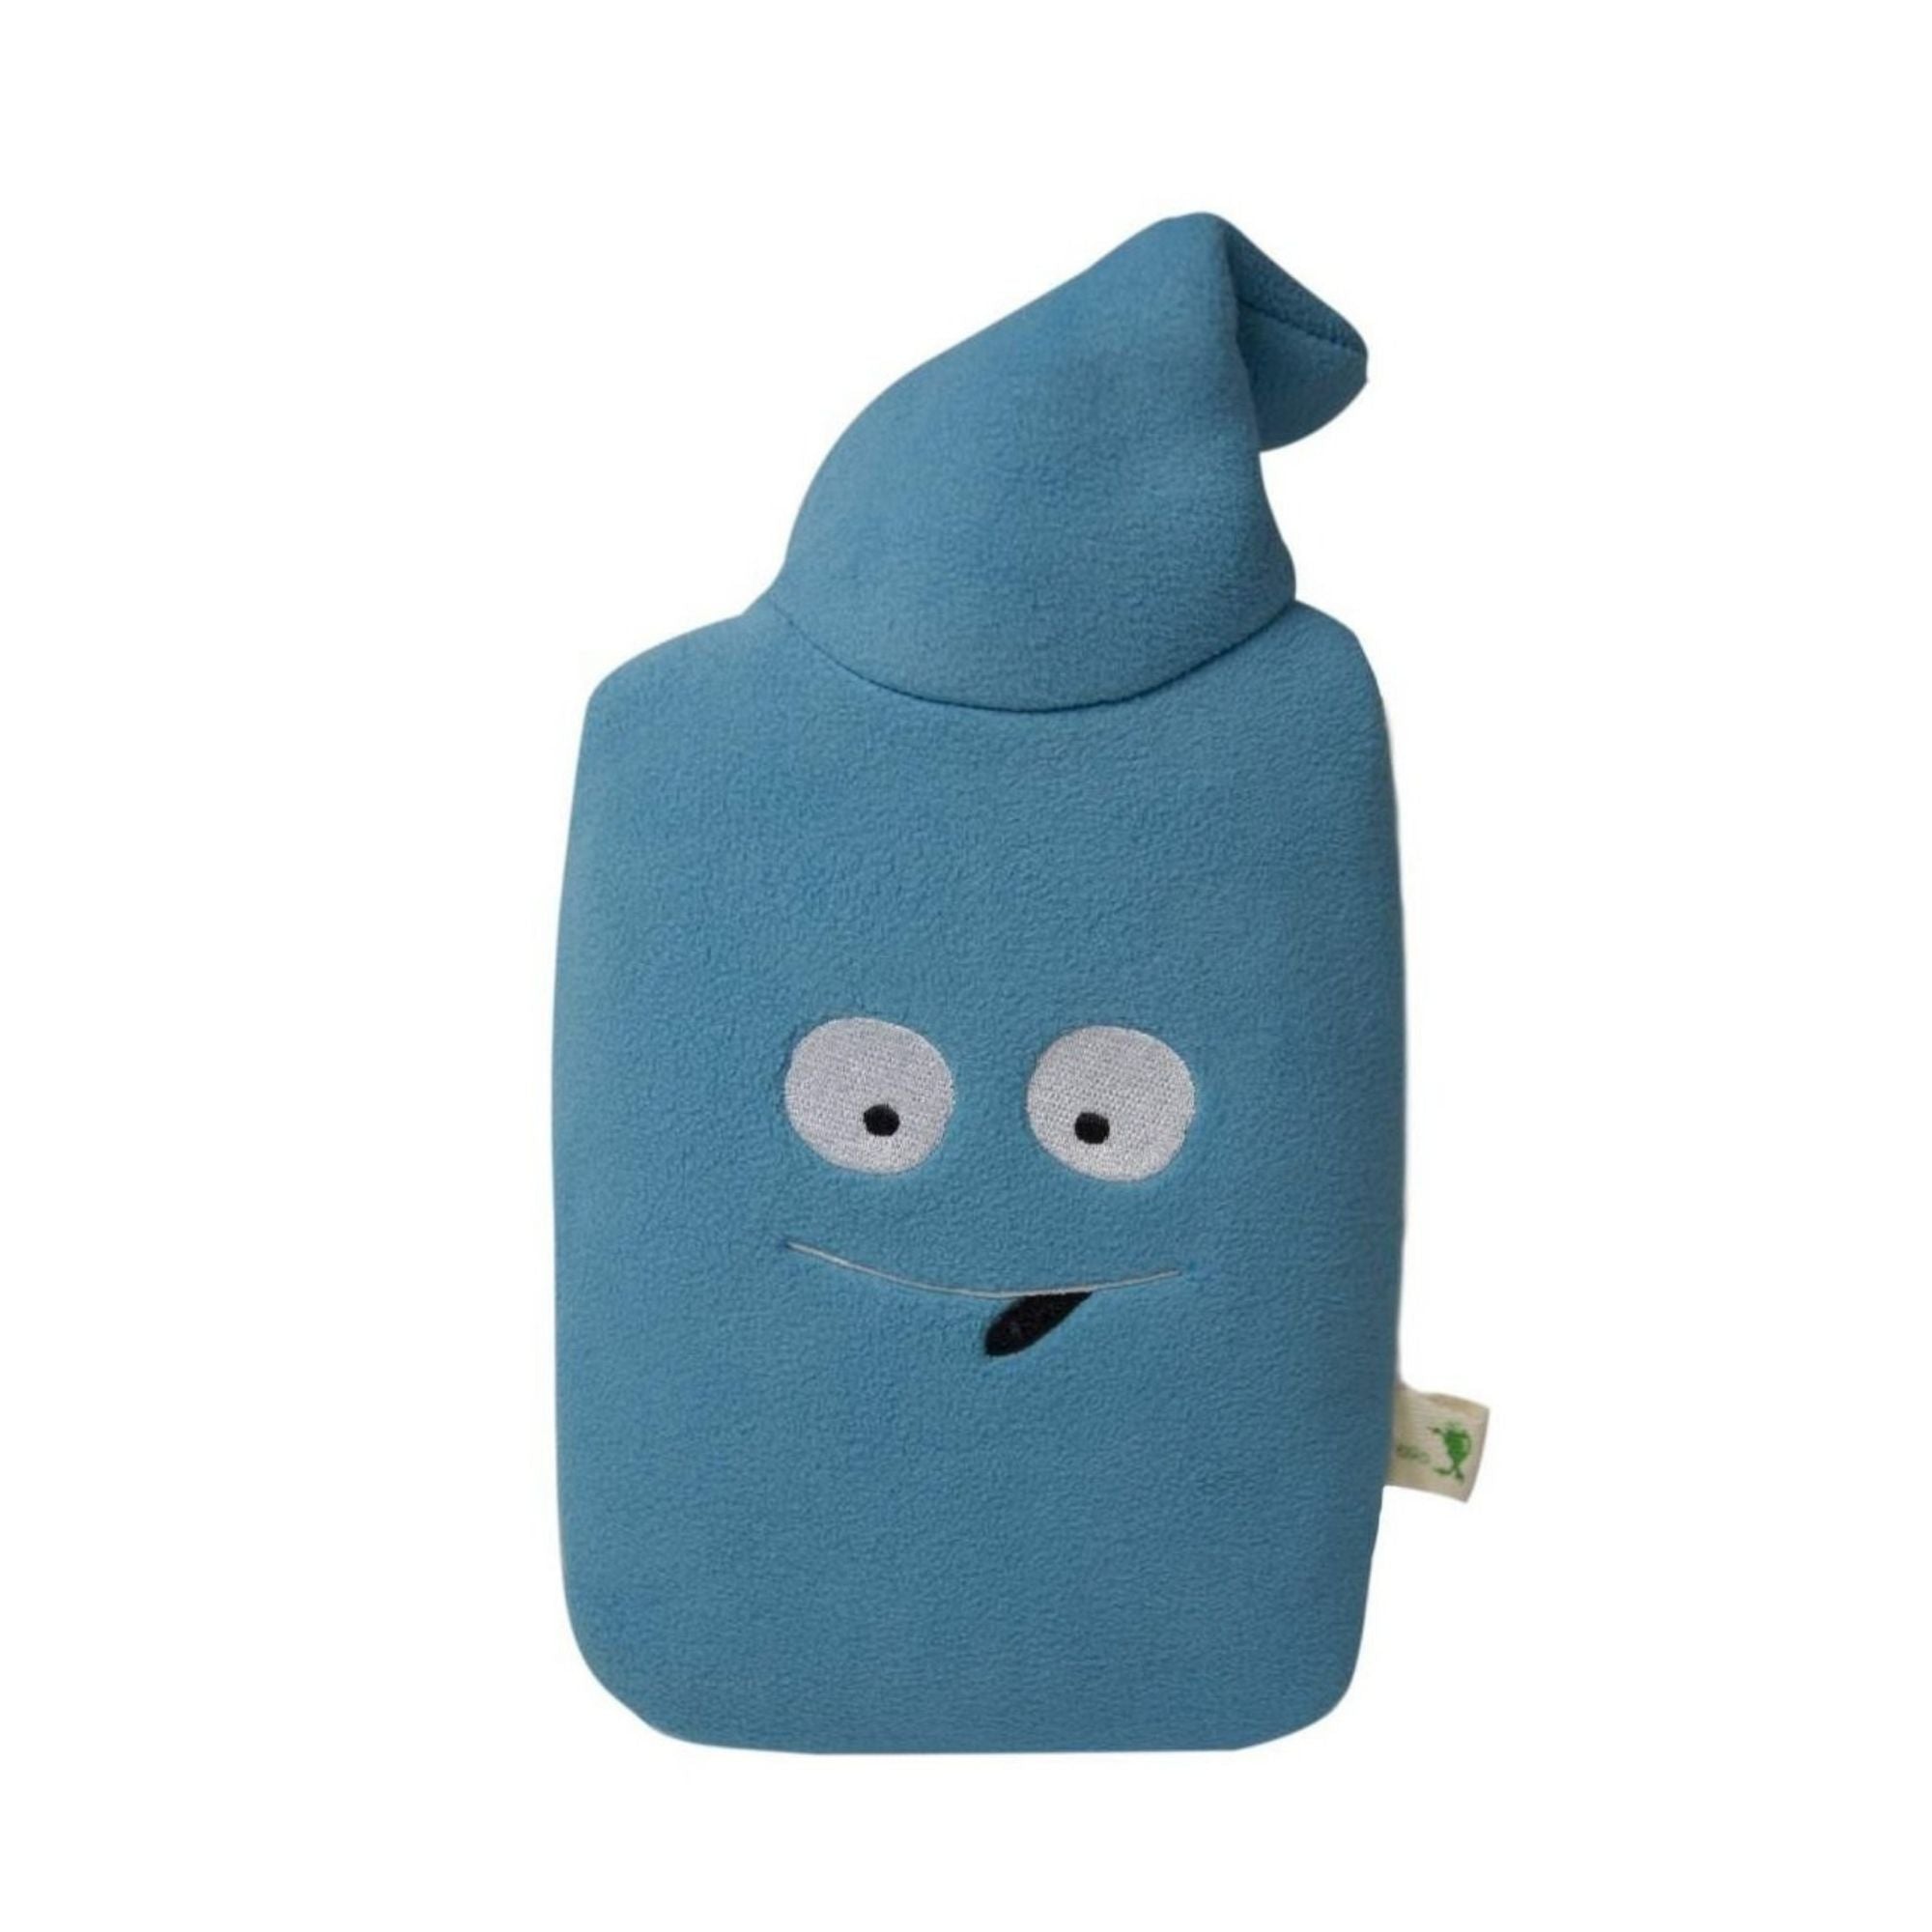 0.8 Litre Eco Hot Water Bottle with Smiley Fleece Cover (rubberless)